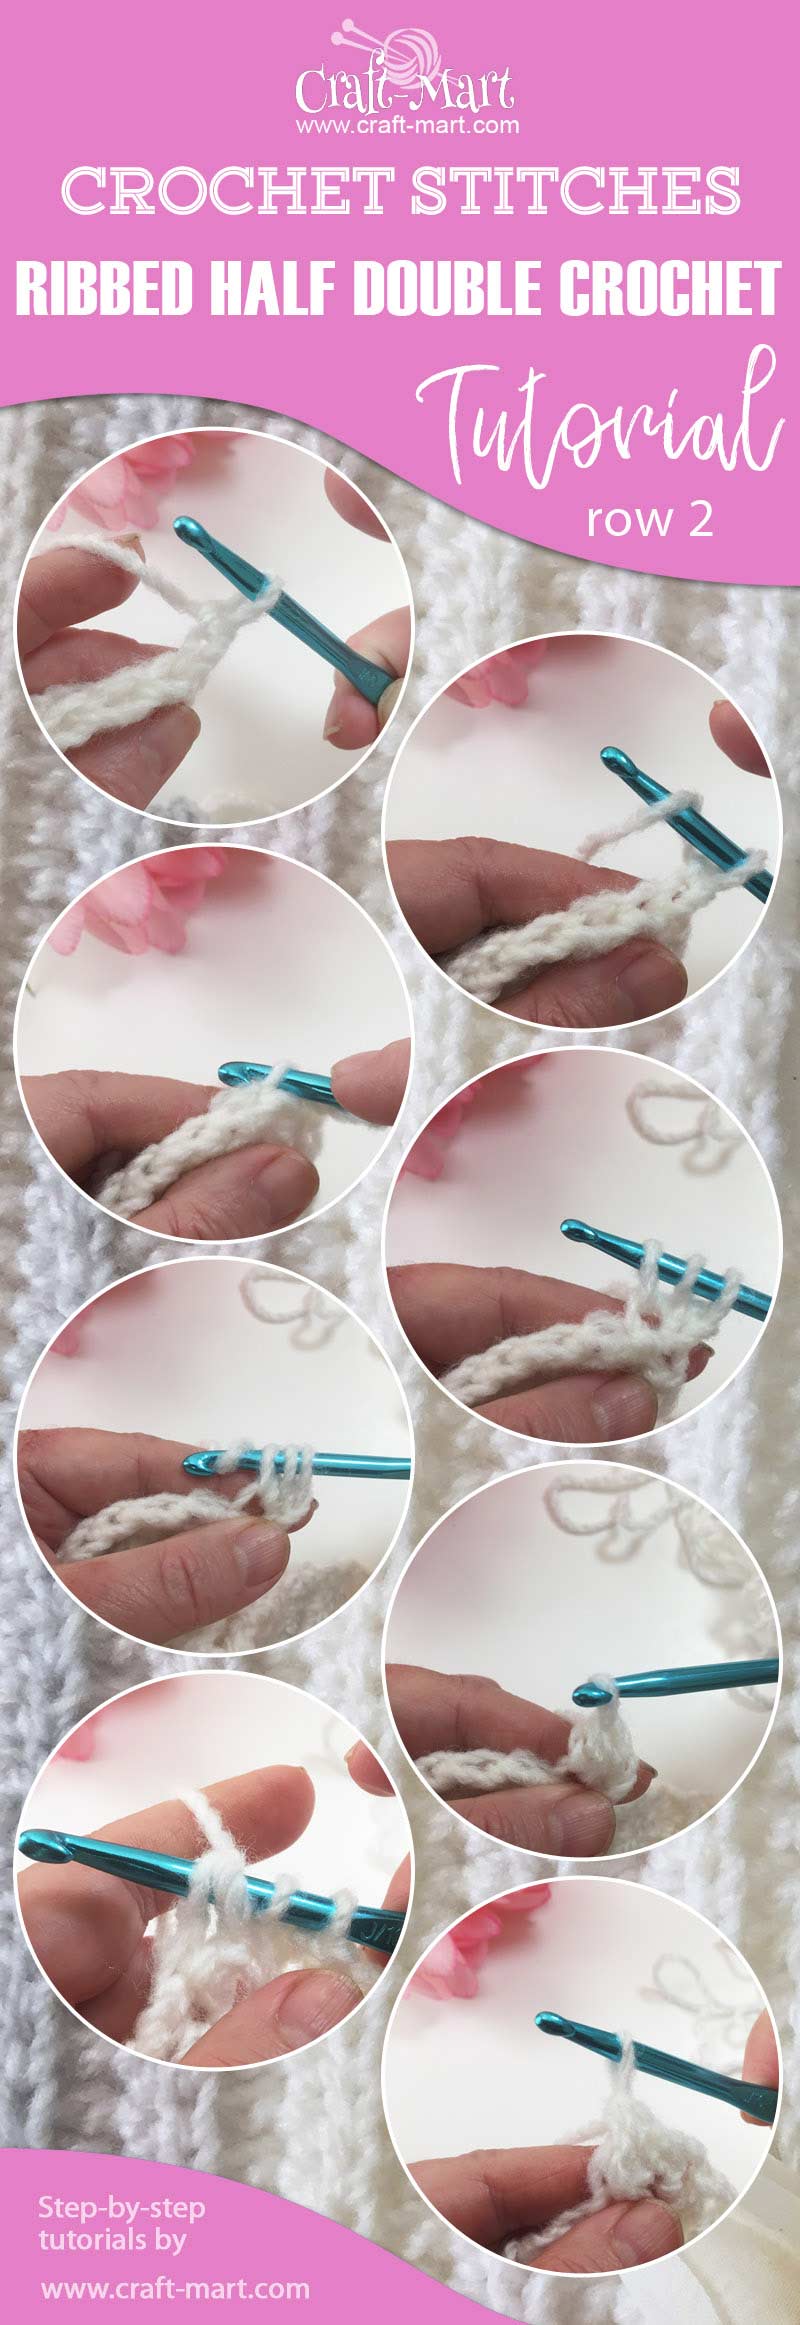 Ribbed half double crochet stitch - the easiest beginner baby blanket - row repeat tutorial by craft-mart.com